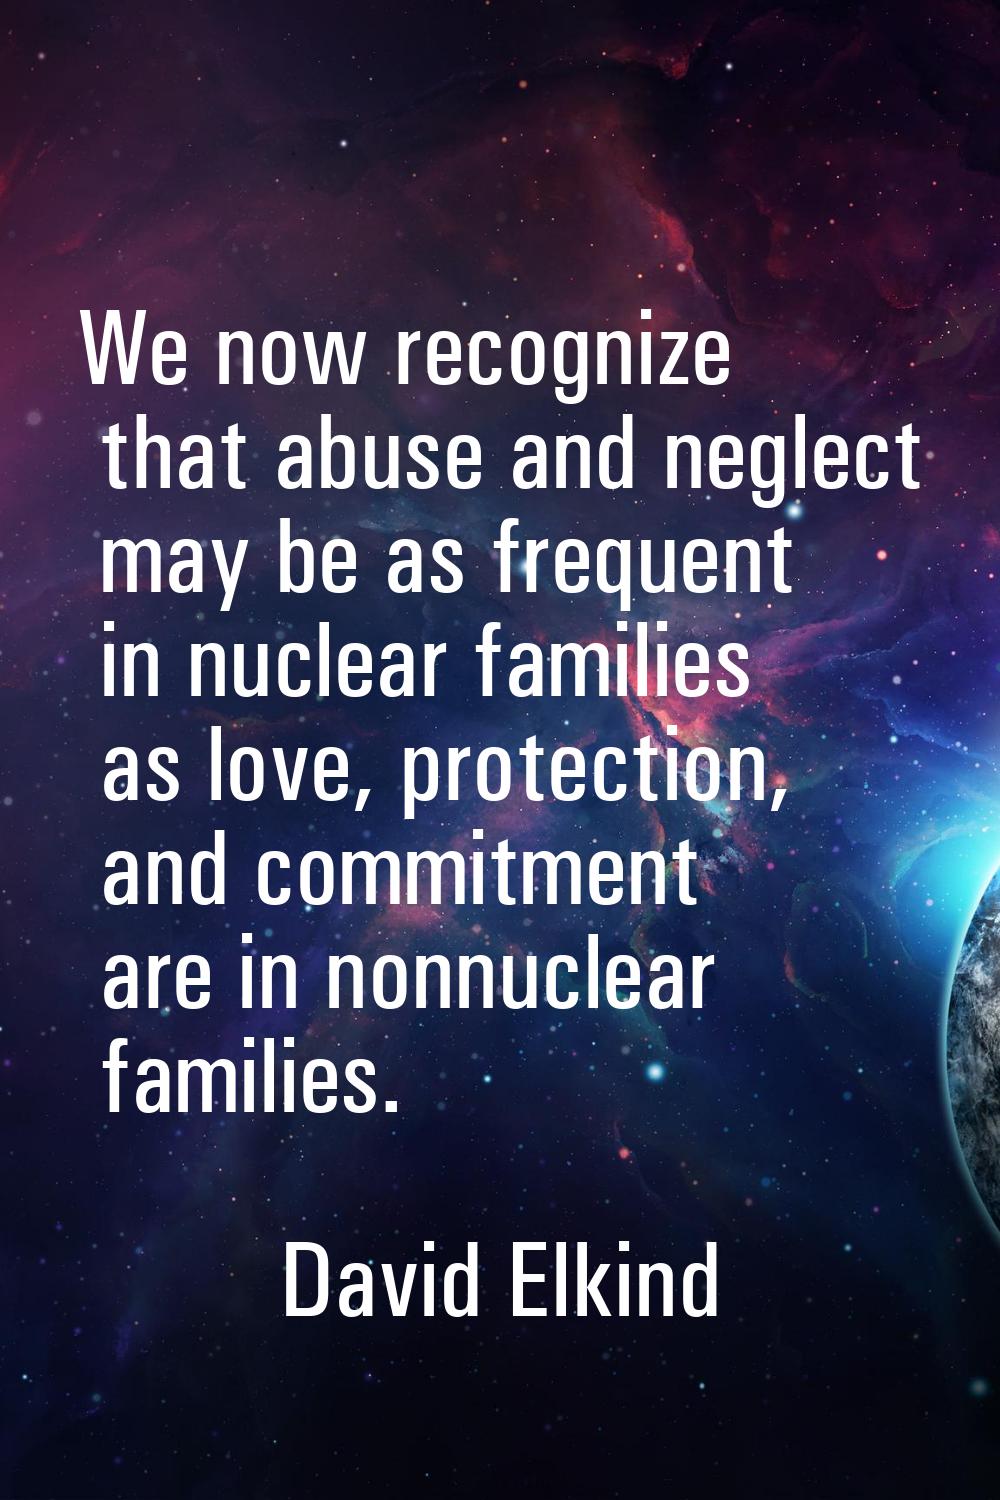 We now recognize that abuse and neglect may be as frequent in nuclear families as love, protection,